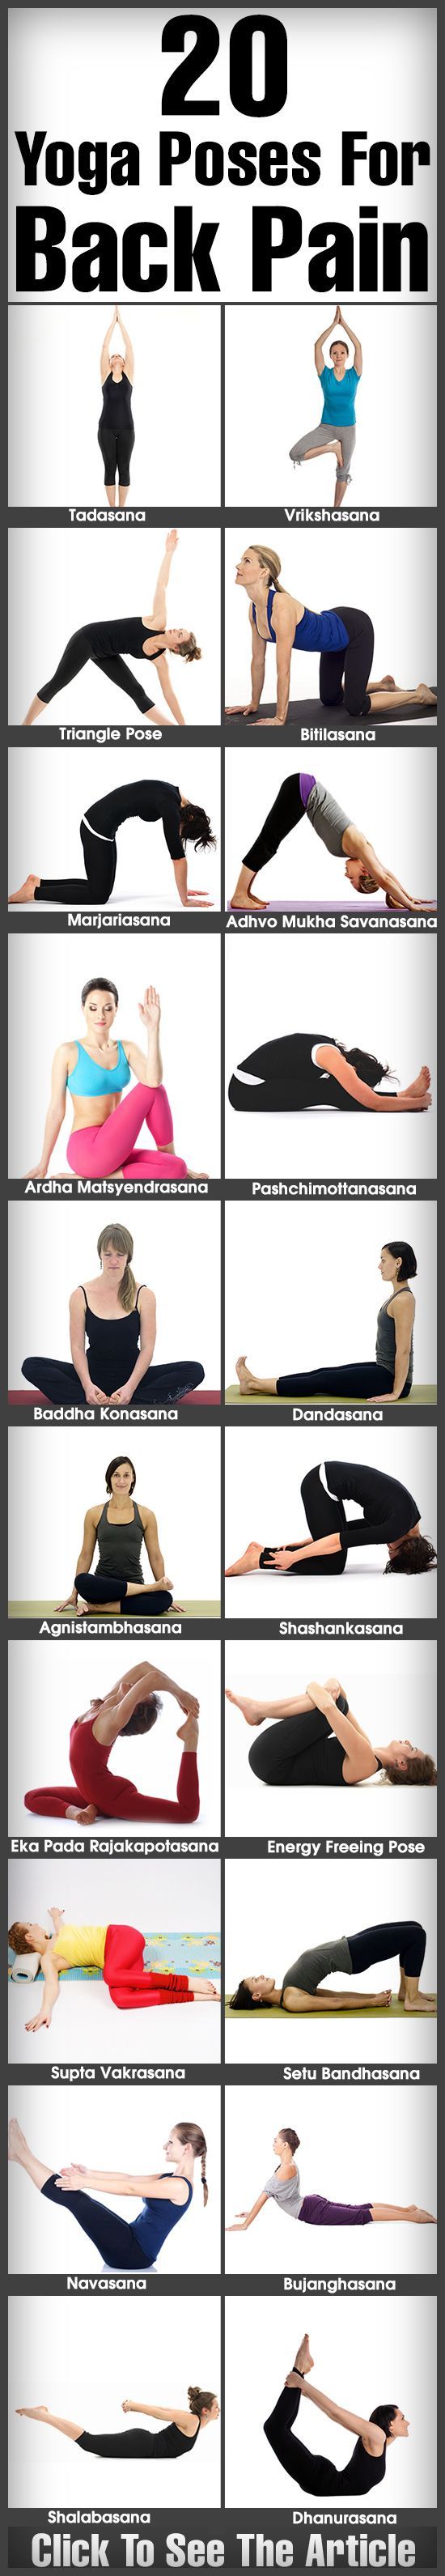 Yoga poses for back pain. Most nurses have back pain, these poses can help!